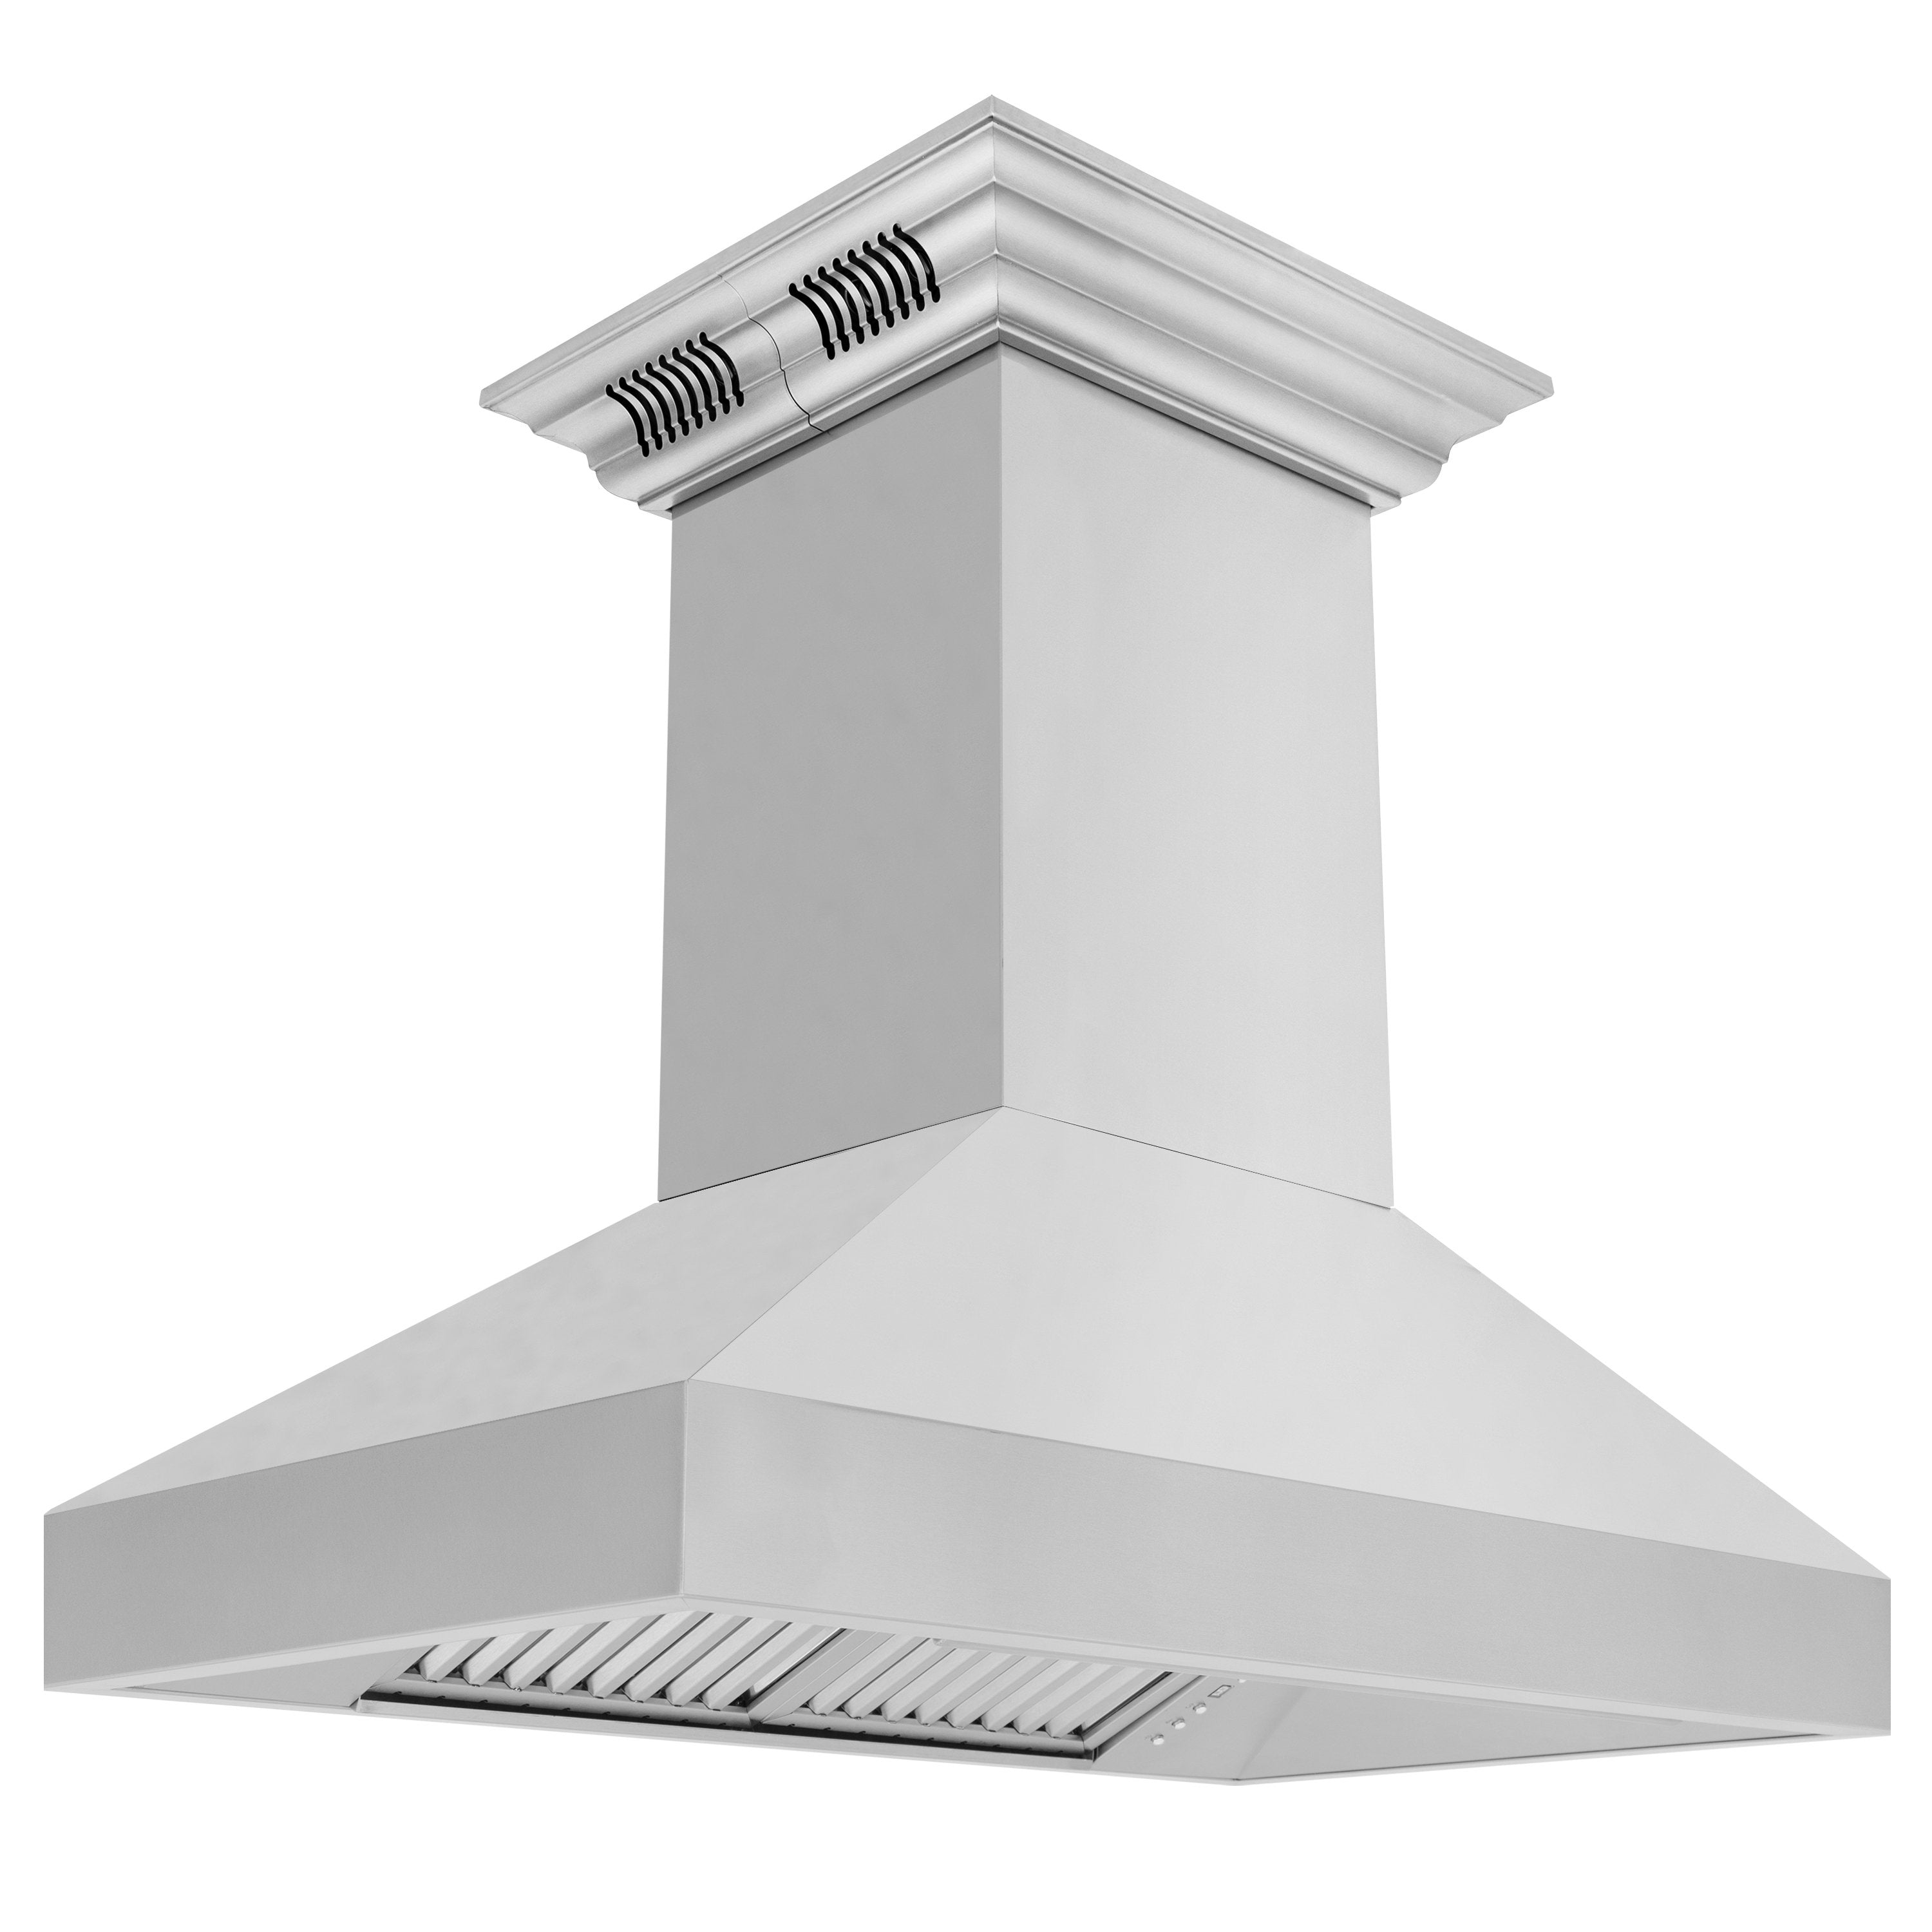 36" ZLINE CrownSound‚ Ducted Vent Island Mount Range Hood in Stainless Steel with Built-in Bluetooth Speakers (597iCRN-BT-36)